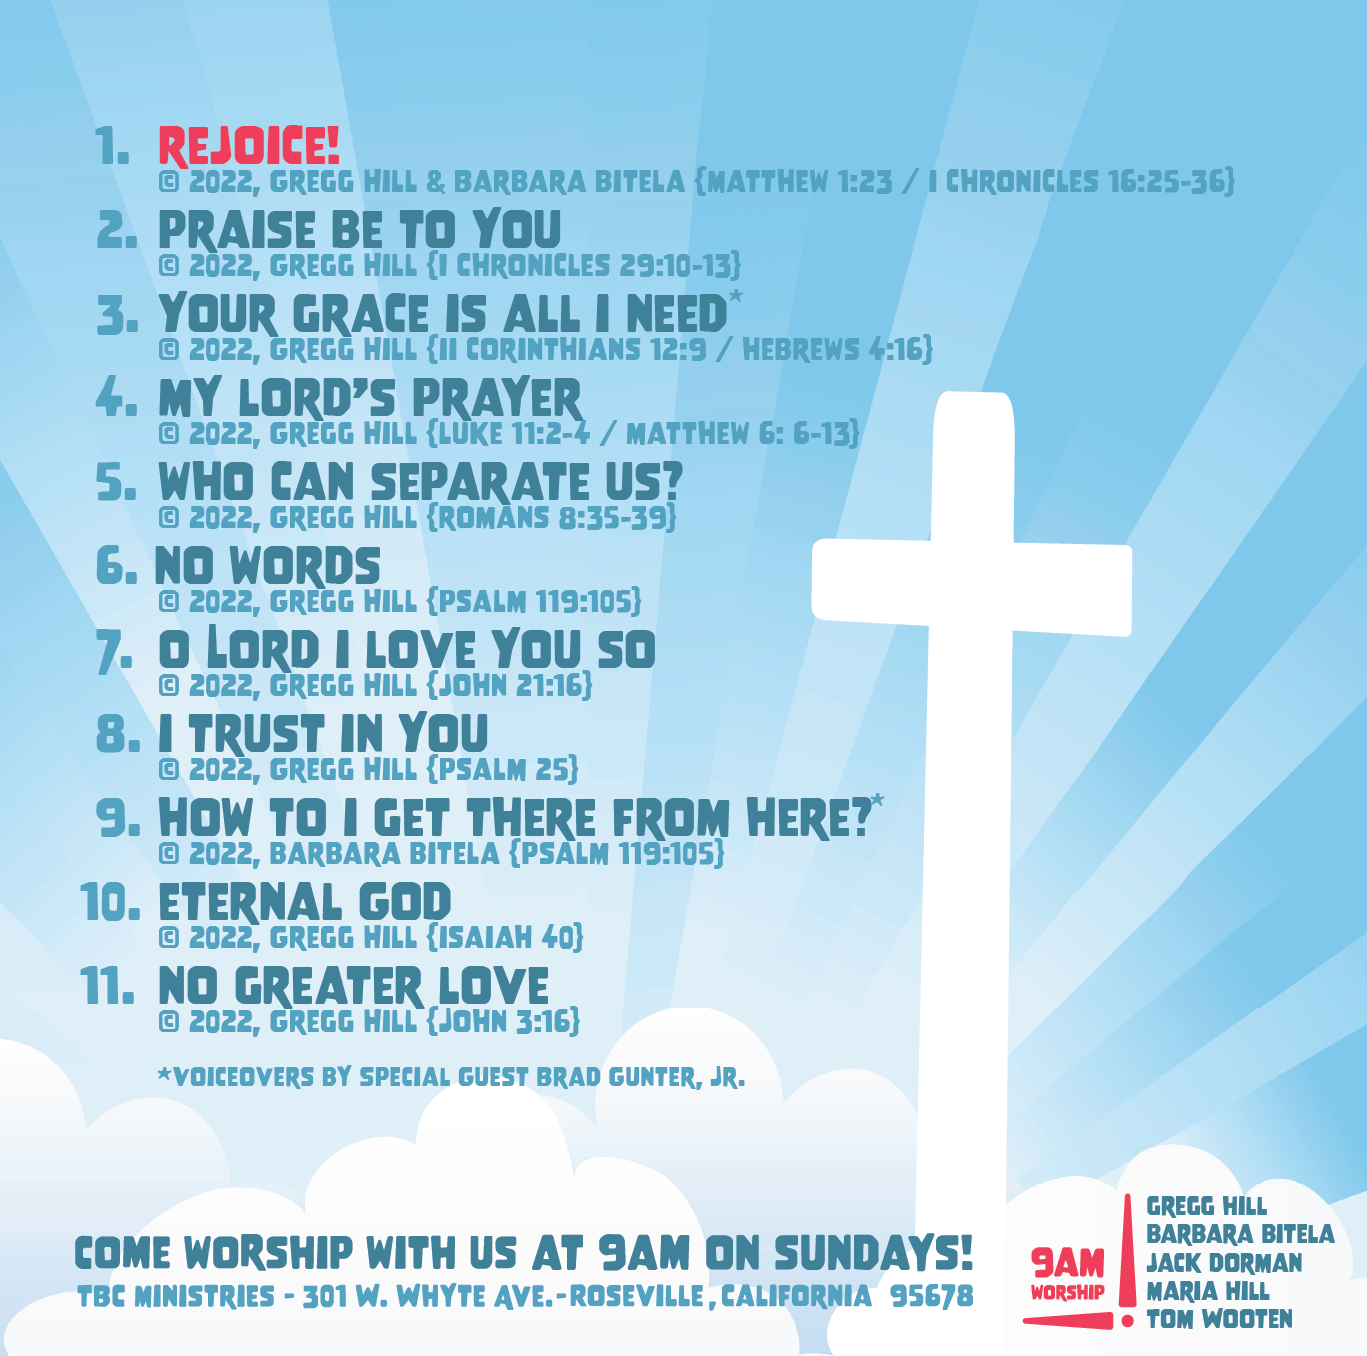 Album insert for "rejoice!" by 9am worship